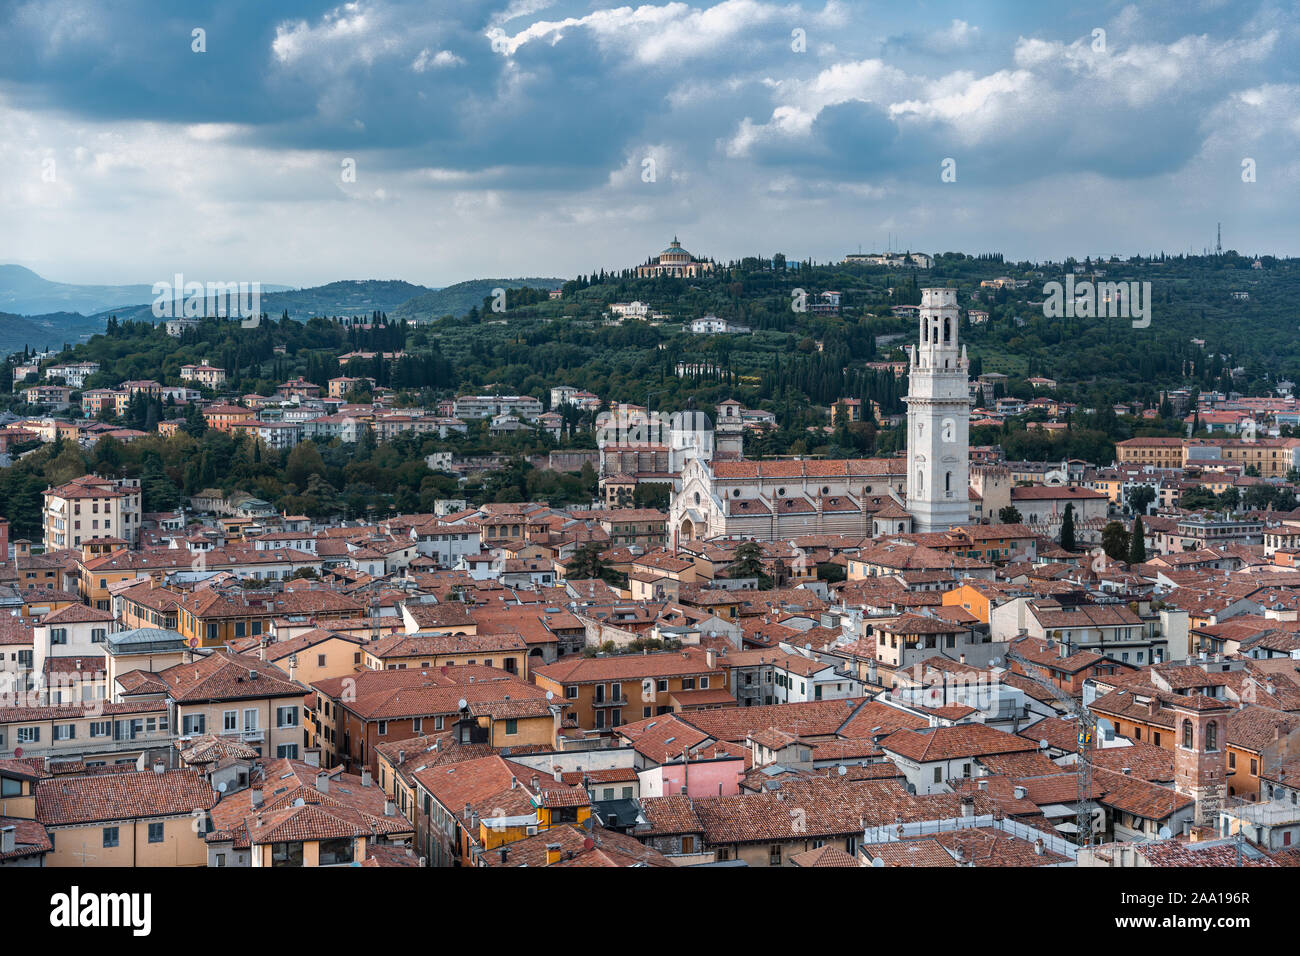 Top view of red brick city skyline from torre dei lamberti tower in Verona, Italy Stock Photo